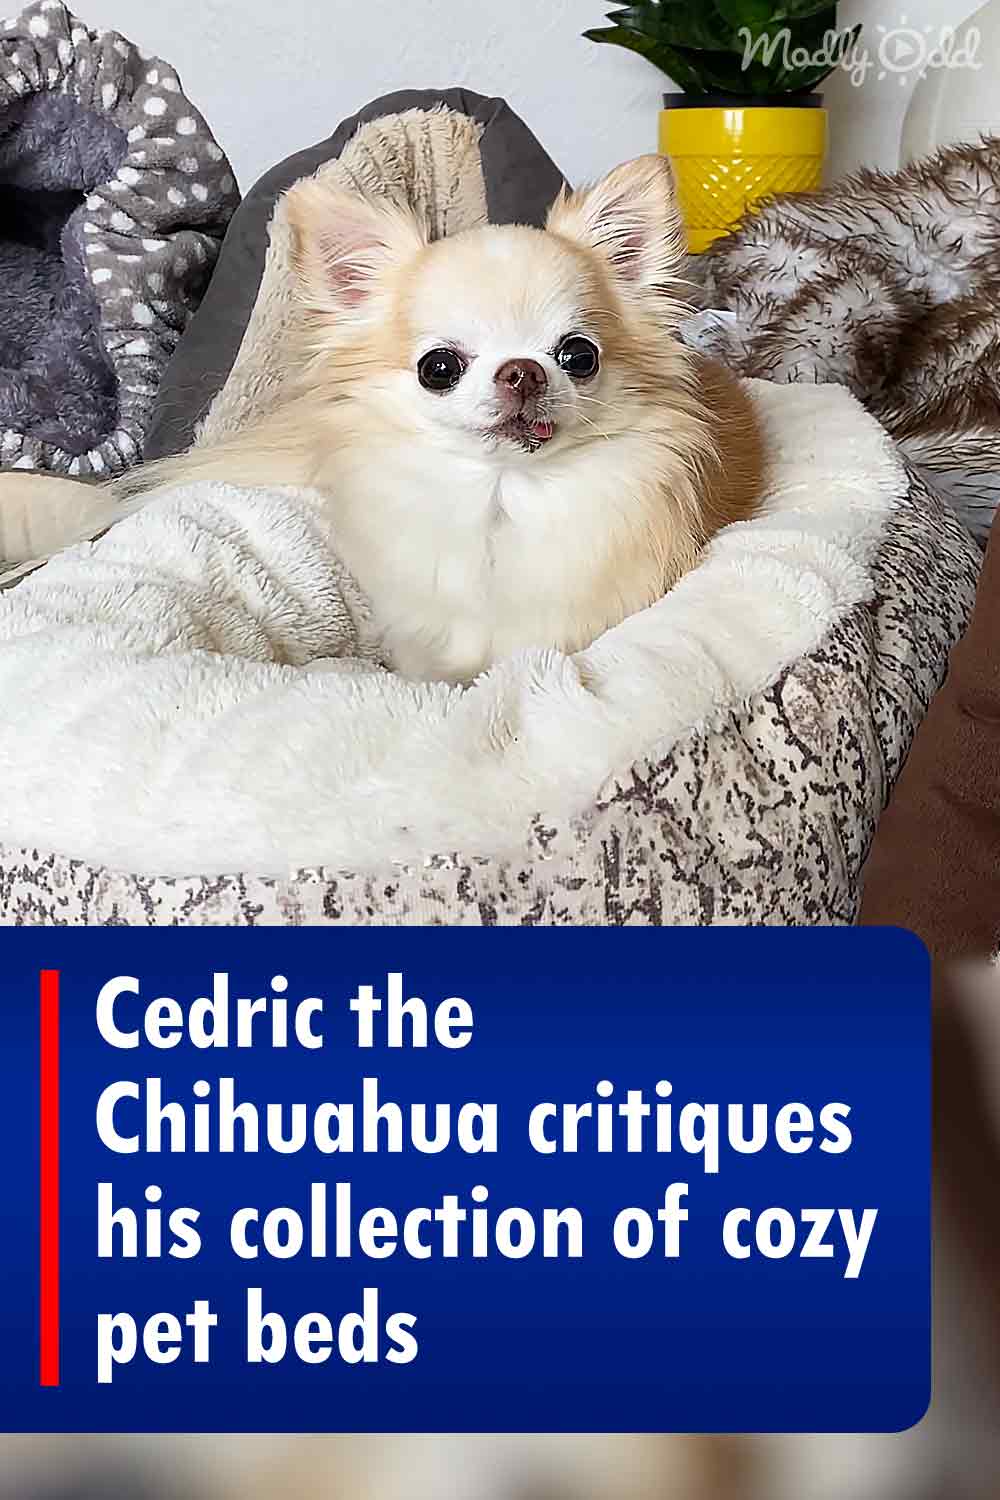 Cedric the Chihuahua critiques his collection of cozy pet beds